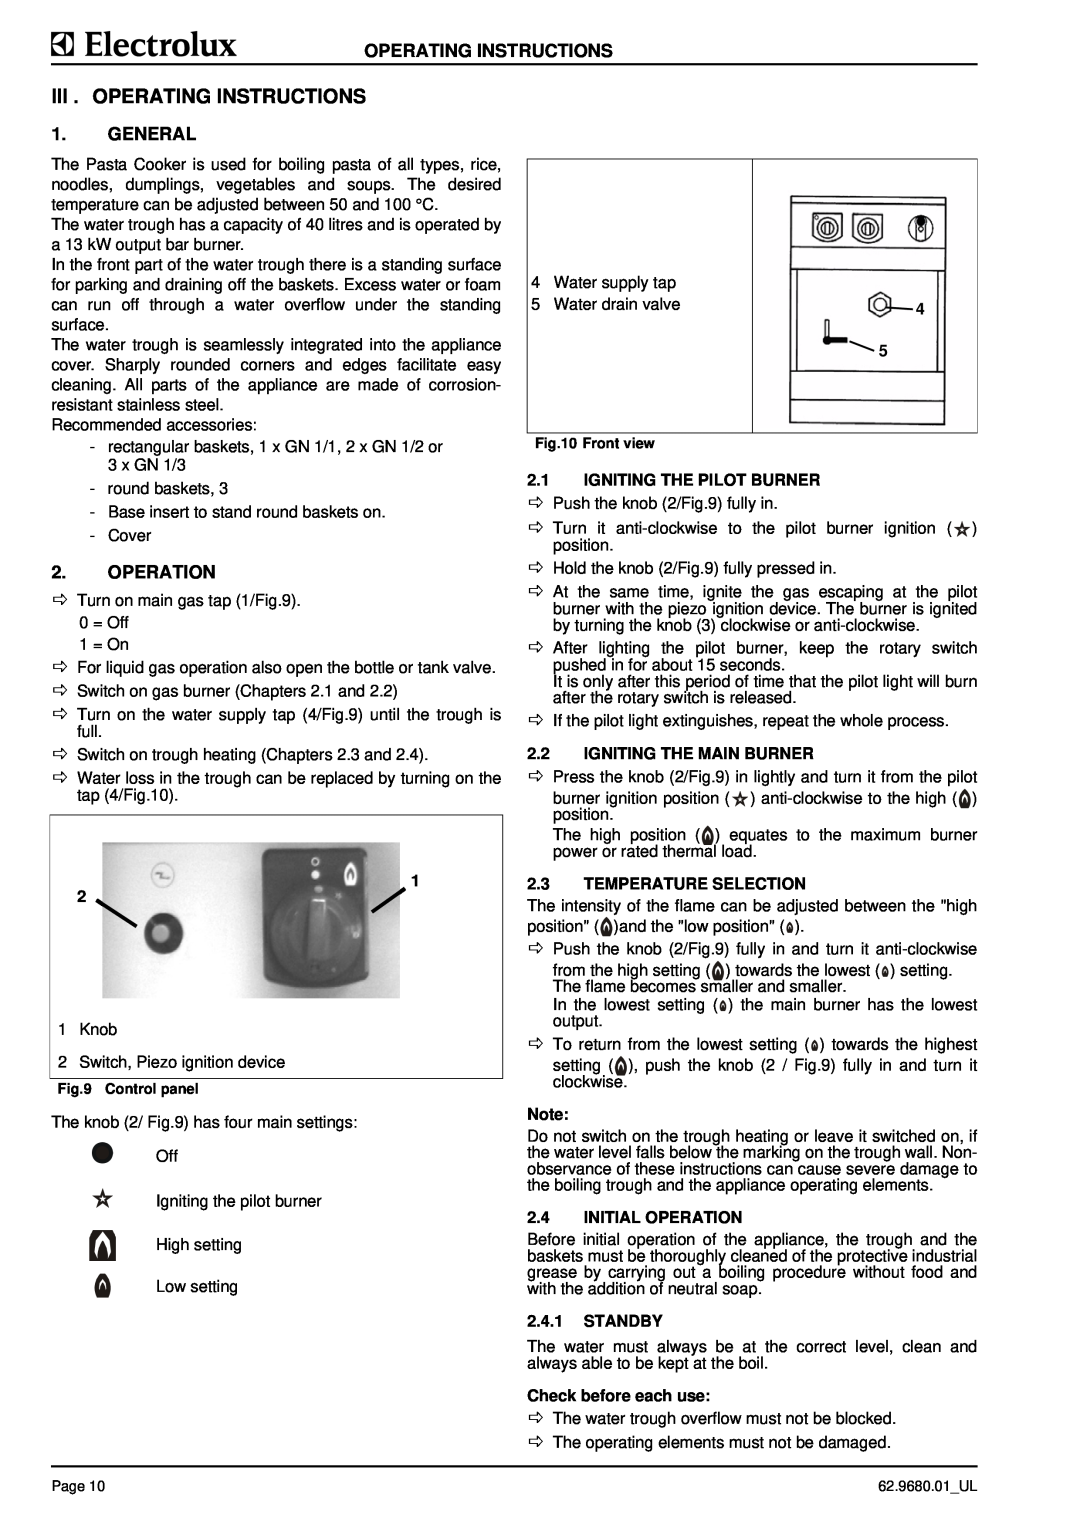 Electrolux WKGROFOOOO Iii . Operating Instructions, General, Operation, 2.1IGNITING THE PILOT BURNER, 2.4INITIAL OPERATION 